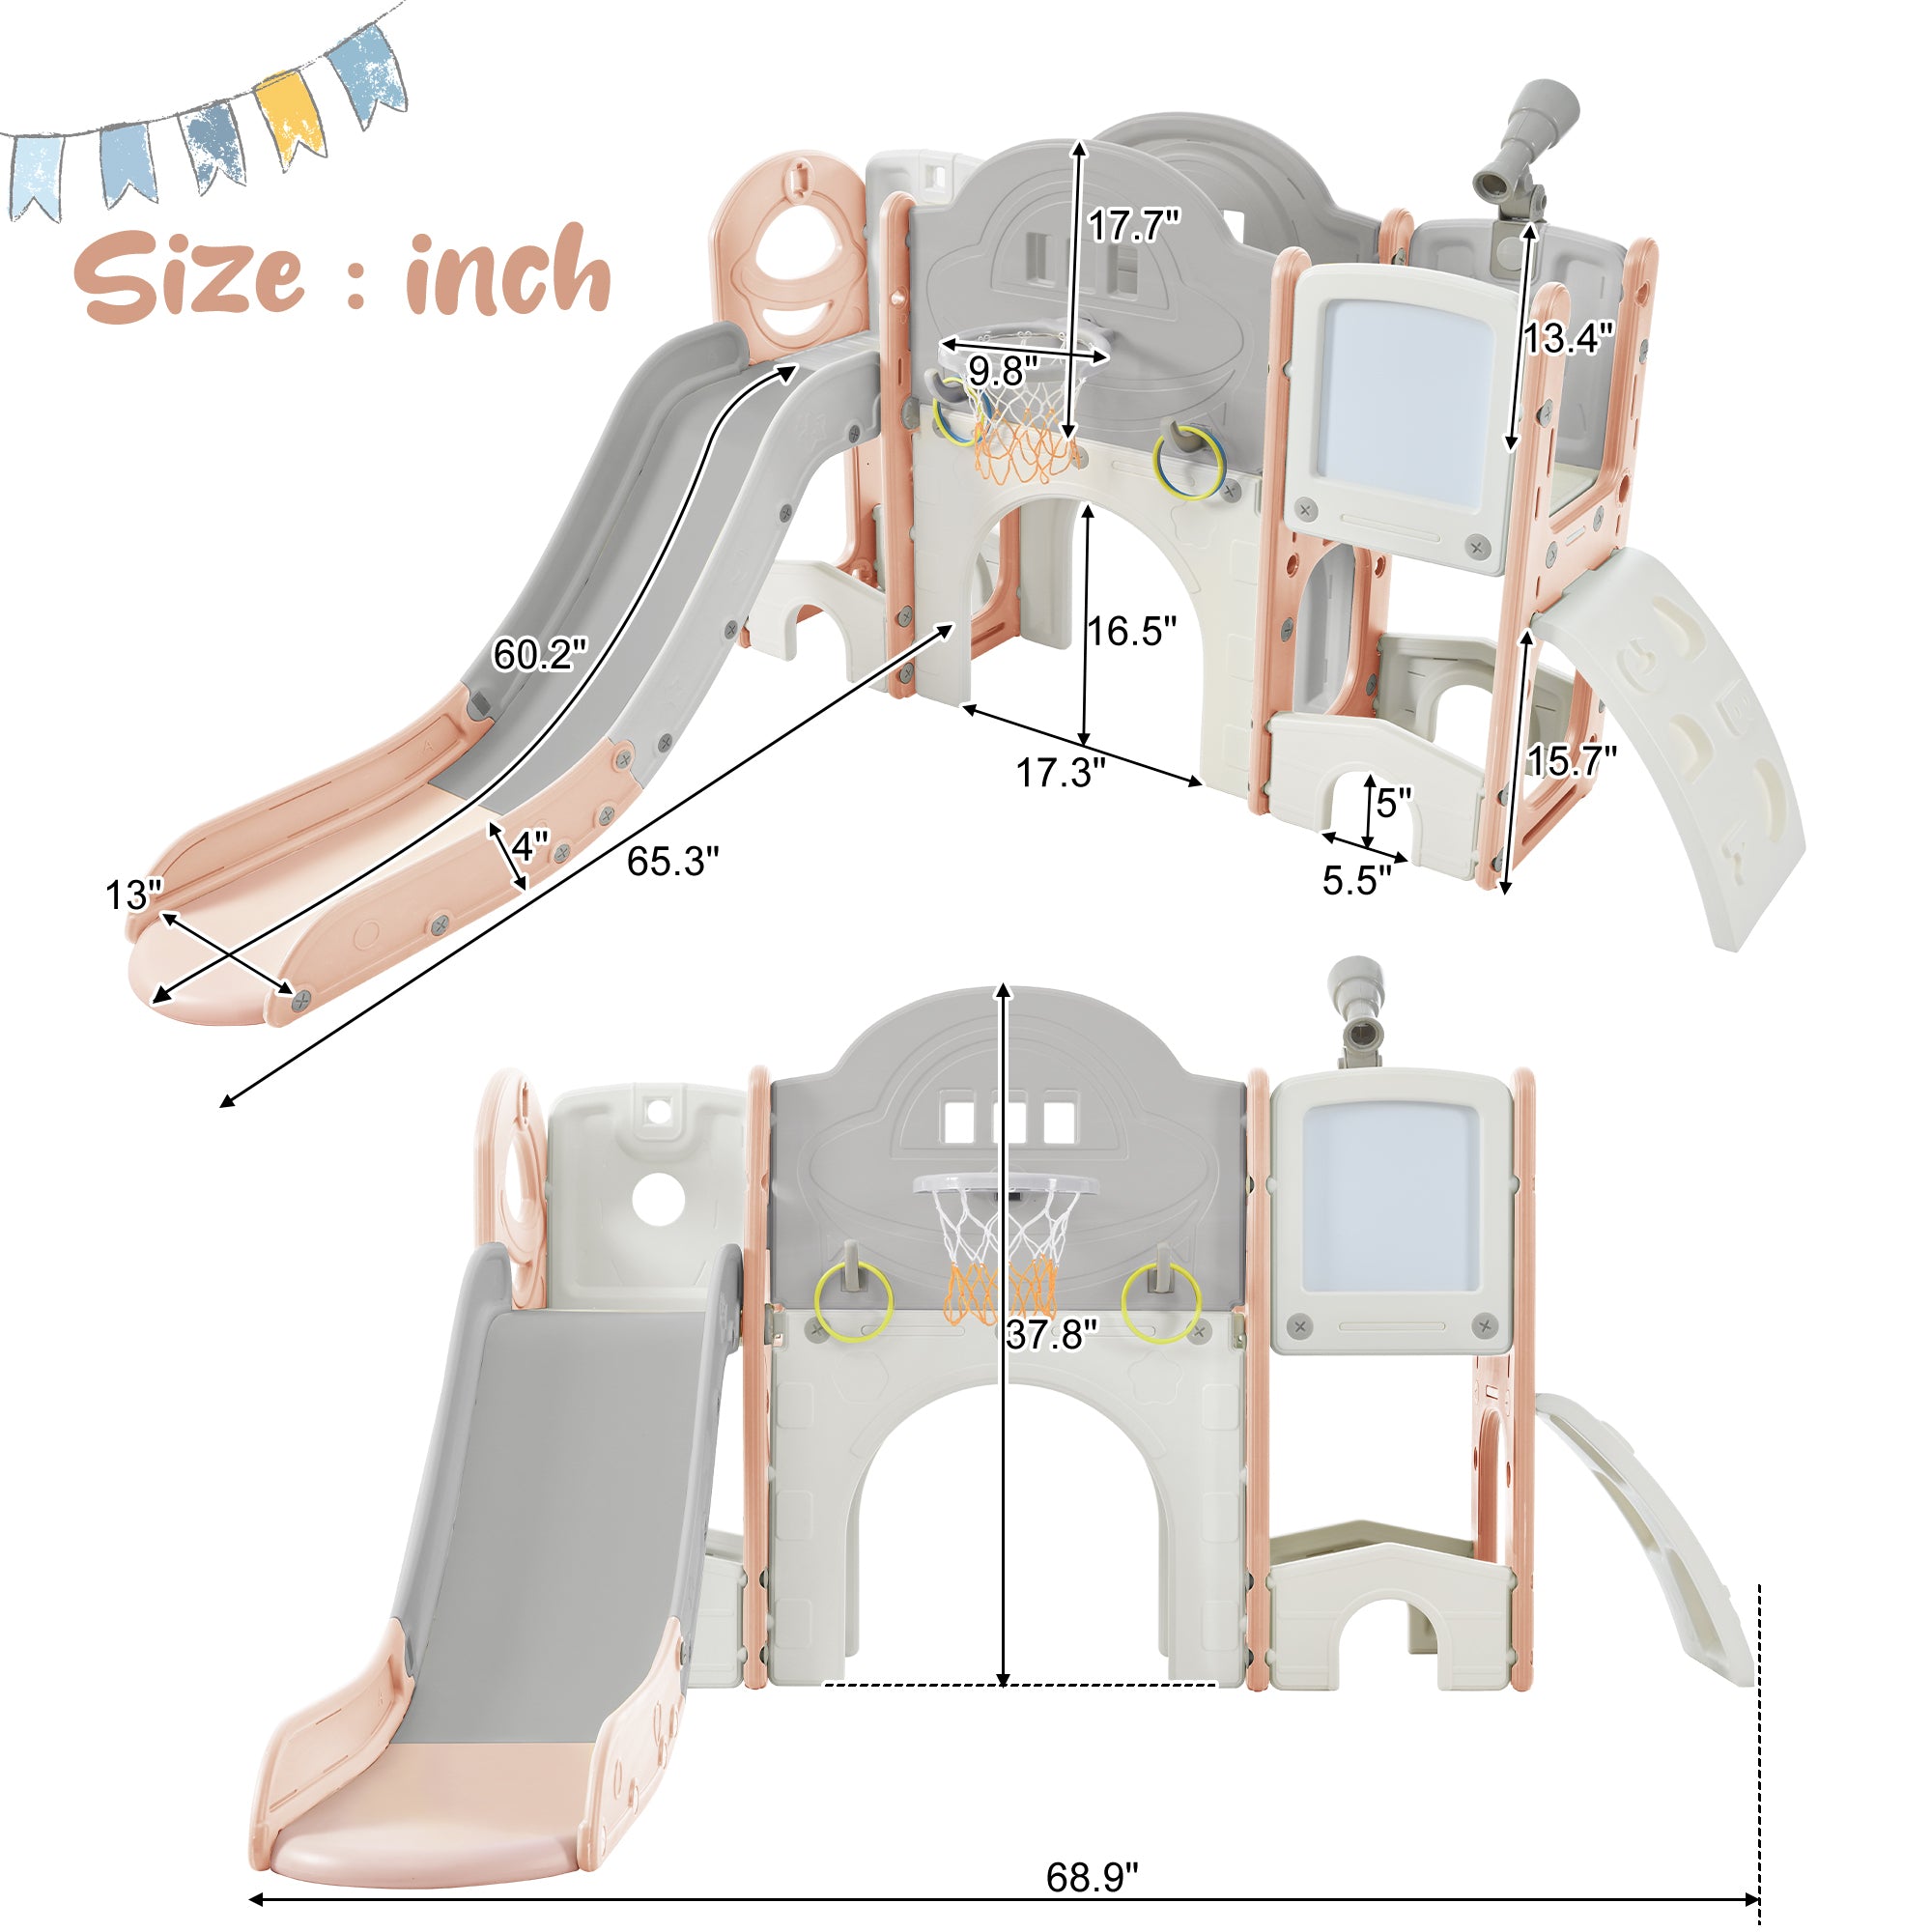 Kids Slide Playset Structure 9 in 1, Freestanding Spaceship Set with Slide, Arch Tunnel, Ring Toss, Drawing Whiteboardl and Basketball Hoop for Toddlers, Kids Climbers Playground